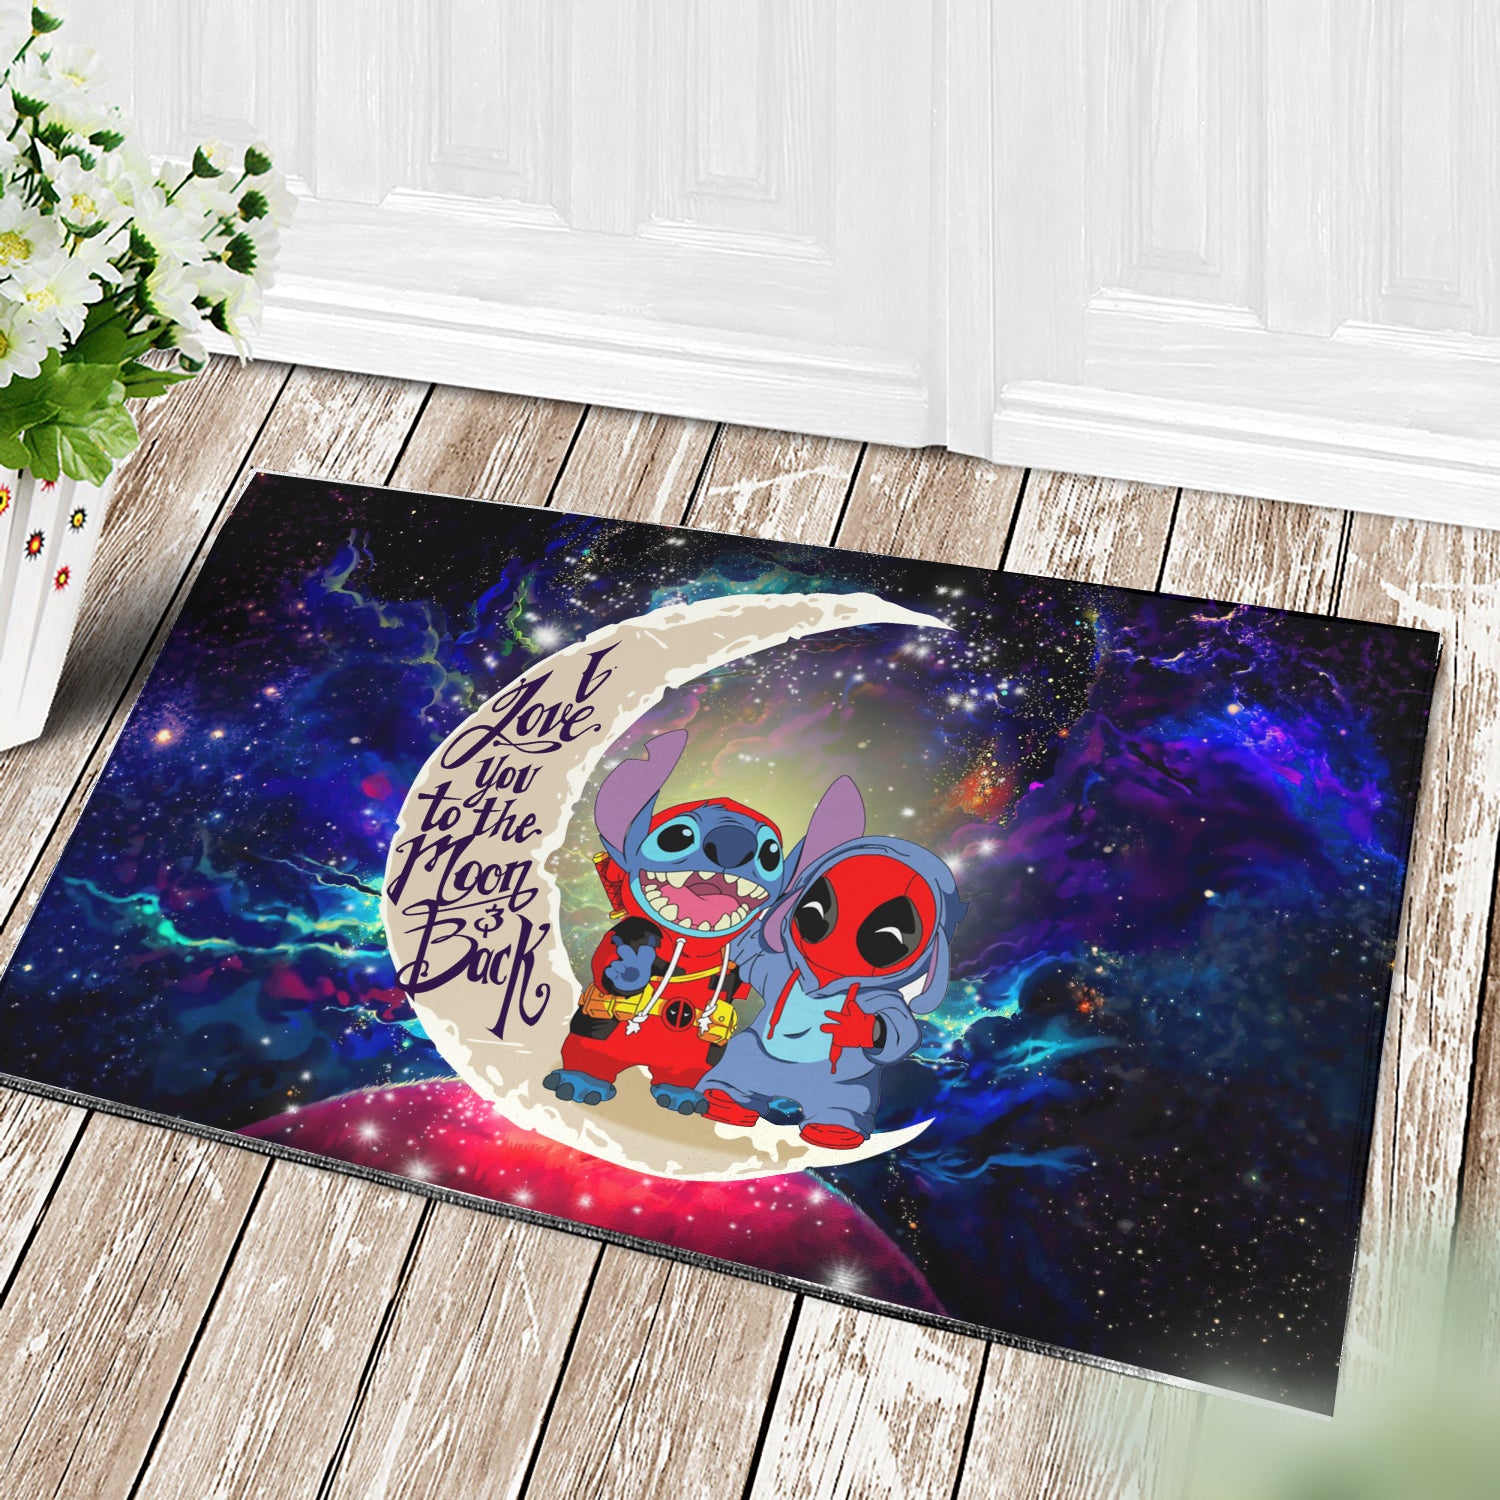 Cute Deadpool And Stitch Love You To The Moon Galaxy Doormat Home Decor Nearkii